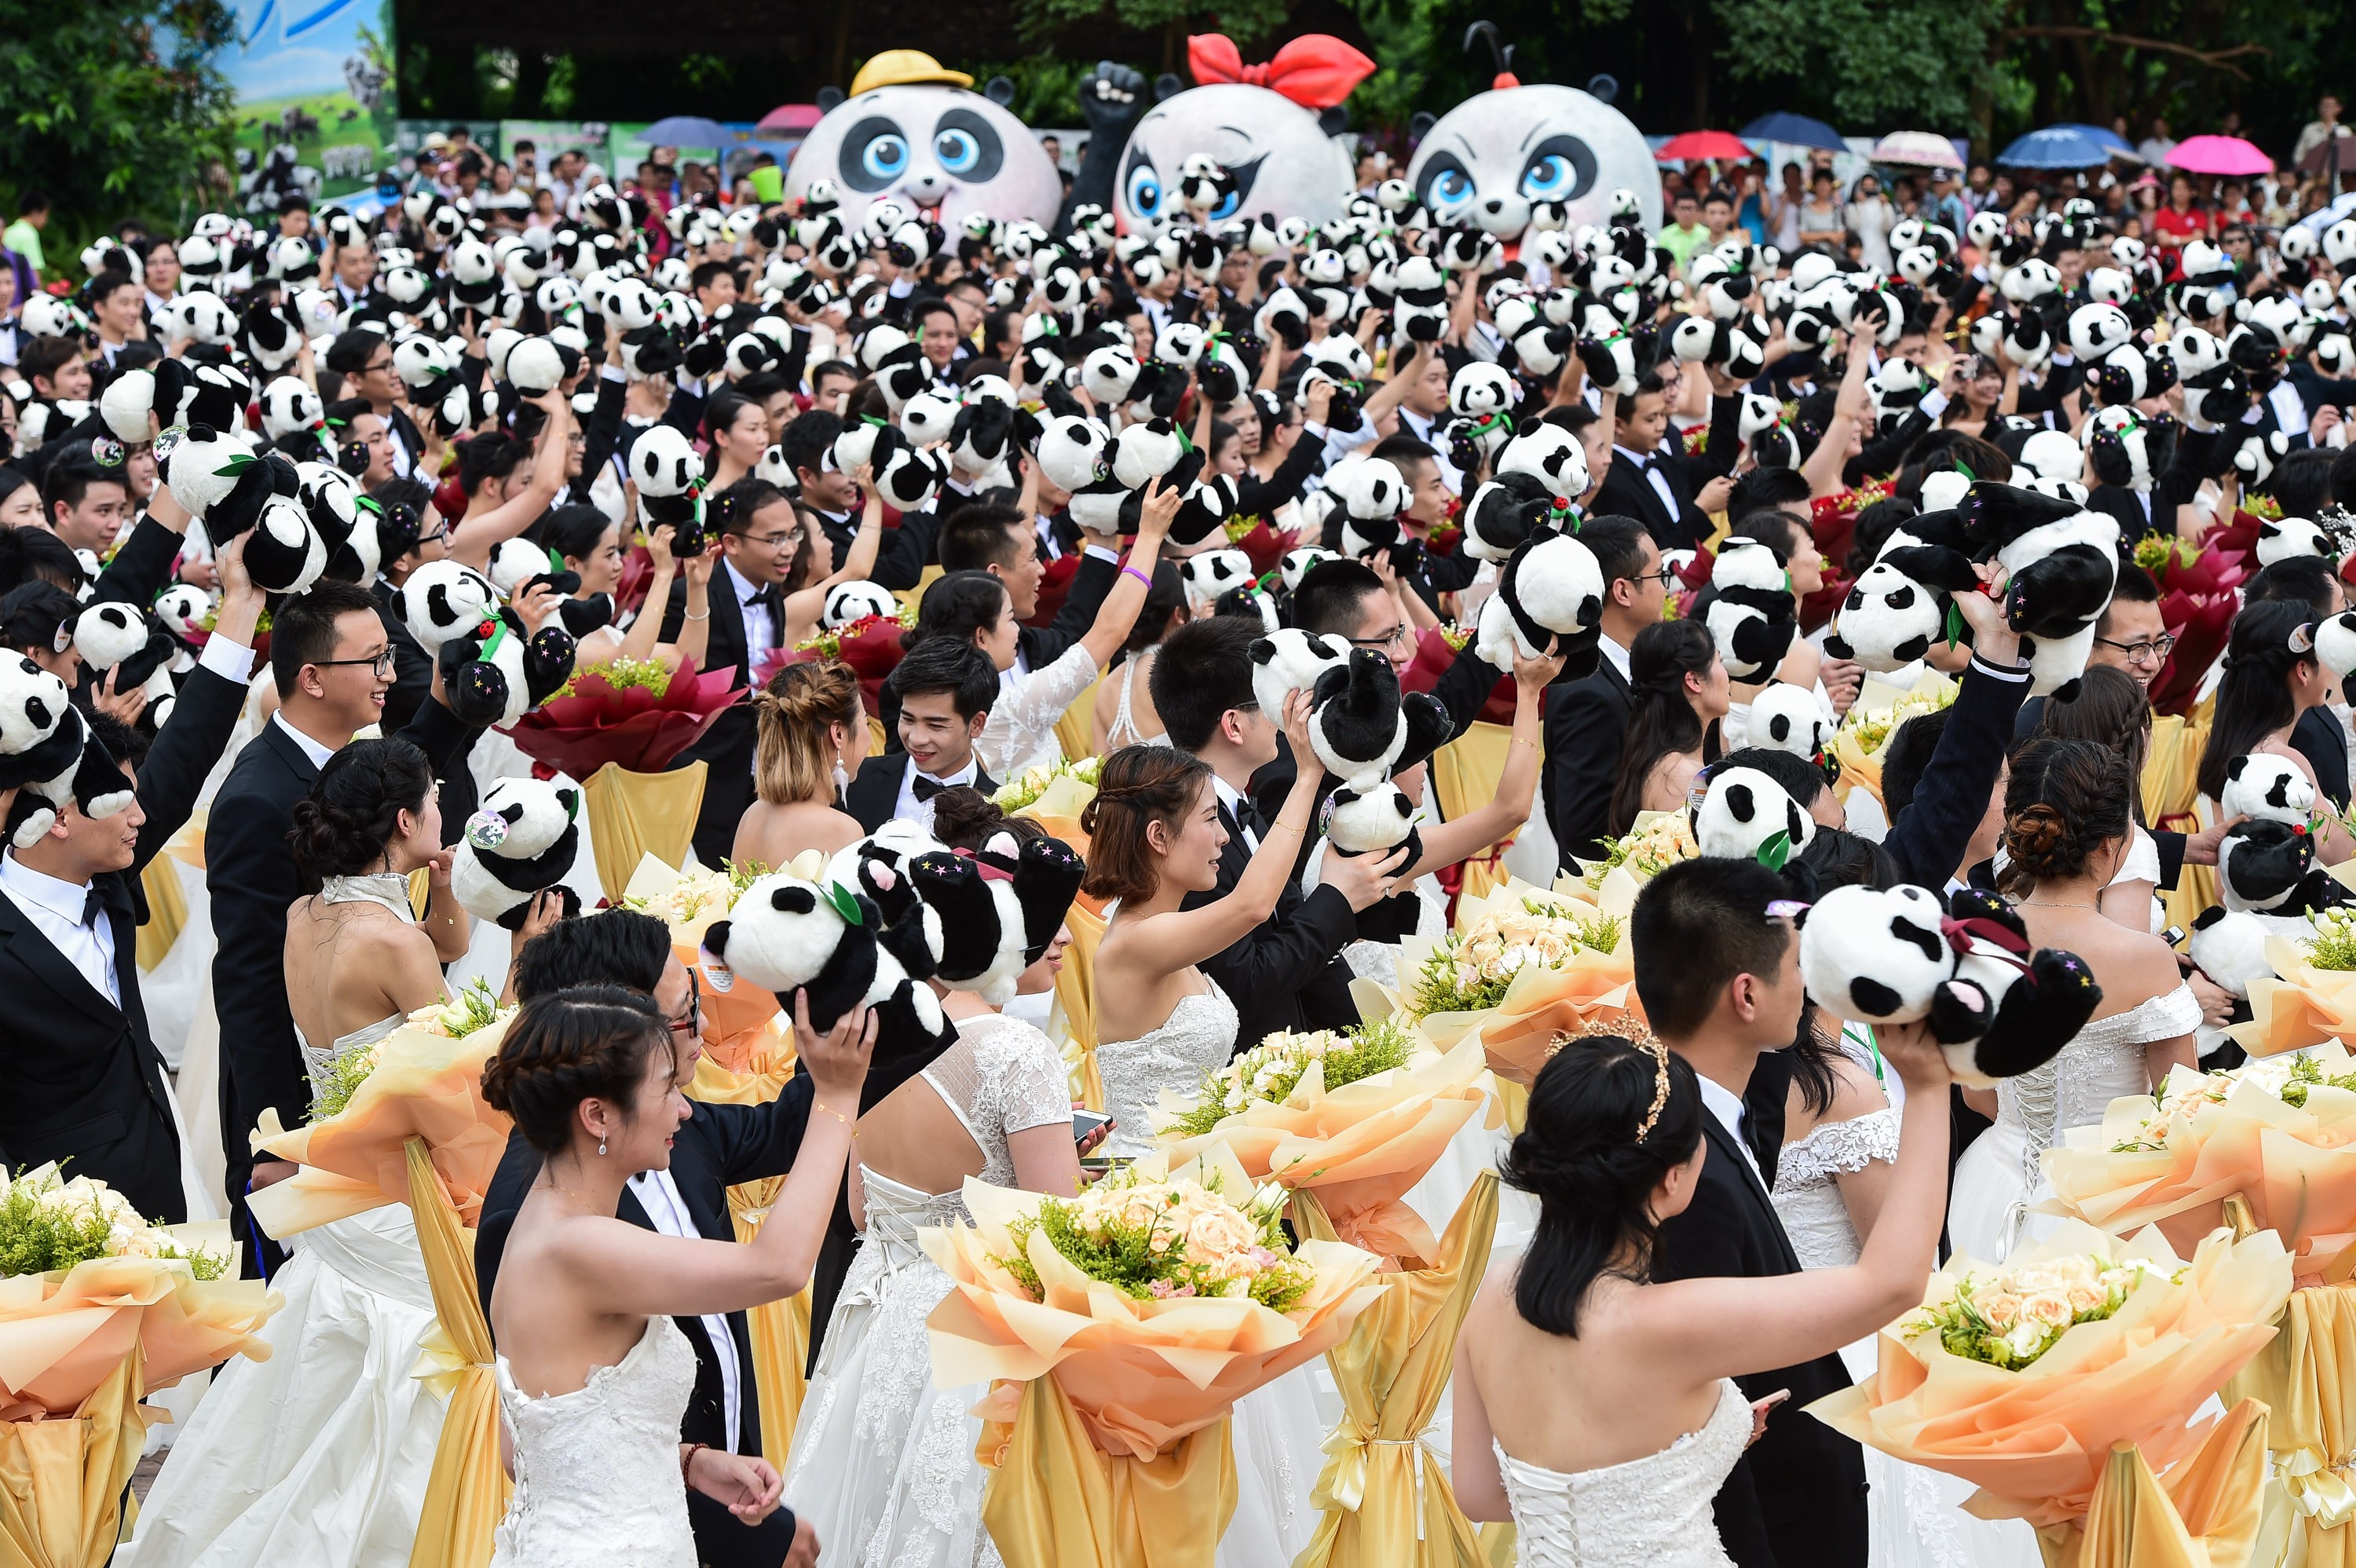 Couples attend a group wedding ceremony at the Chimelong Safari Park in Guangzhou on July 8, 2017. The number of cross-border marriages between Hongkongers and people from the mainland is rising. Photo: Xinhua